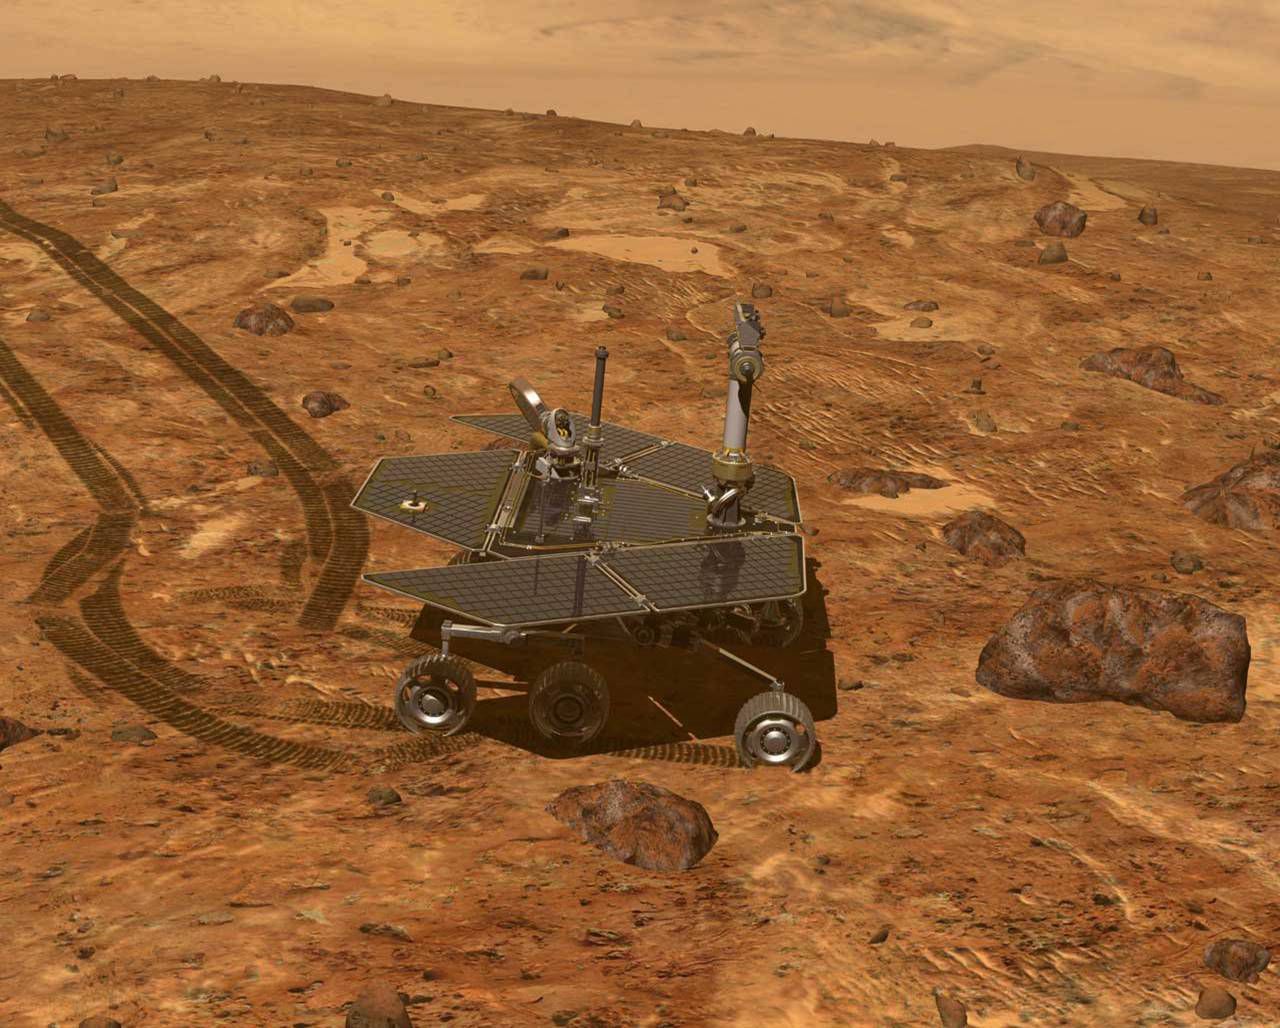 Mars rover Opportunity takes a side trip to investigate a rock it finds interesting. How does it know the rock is interesting?